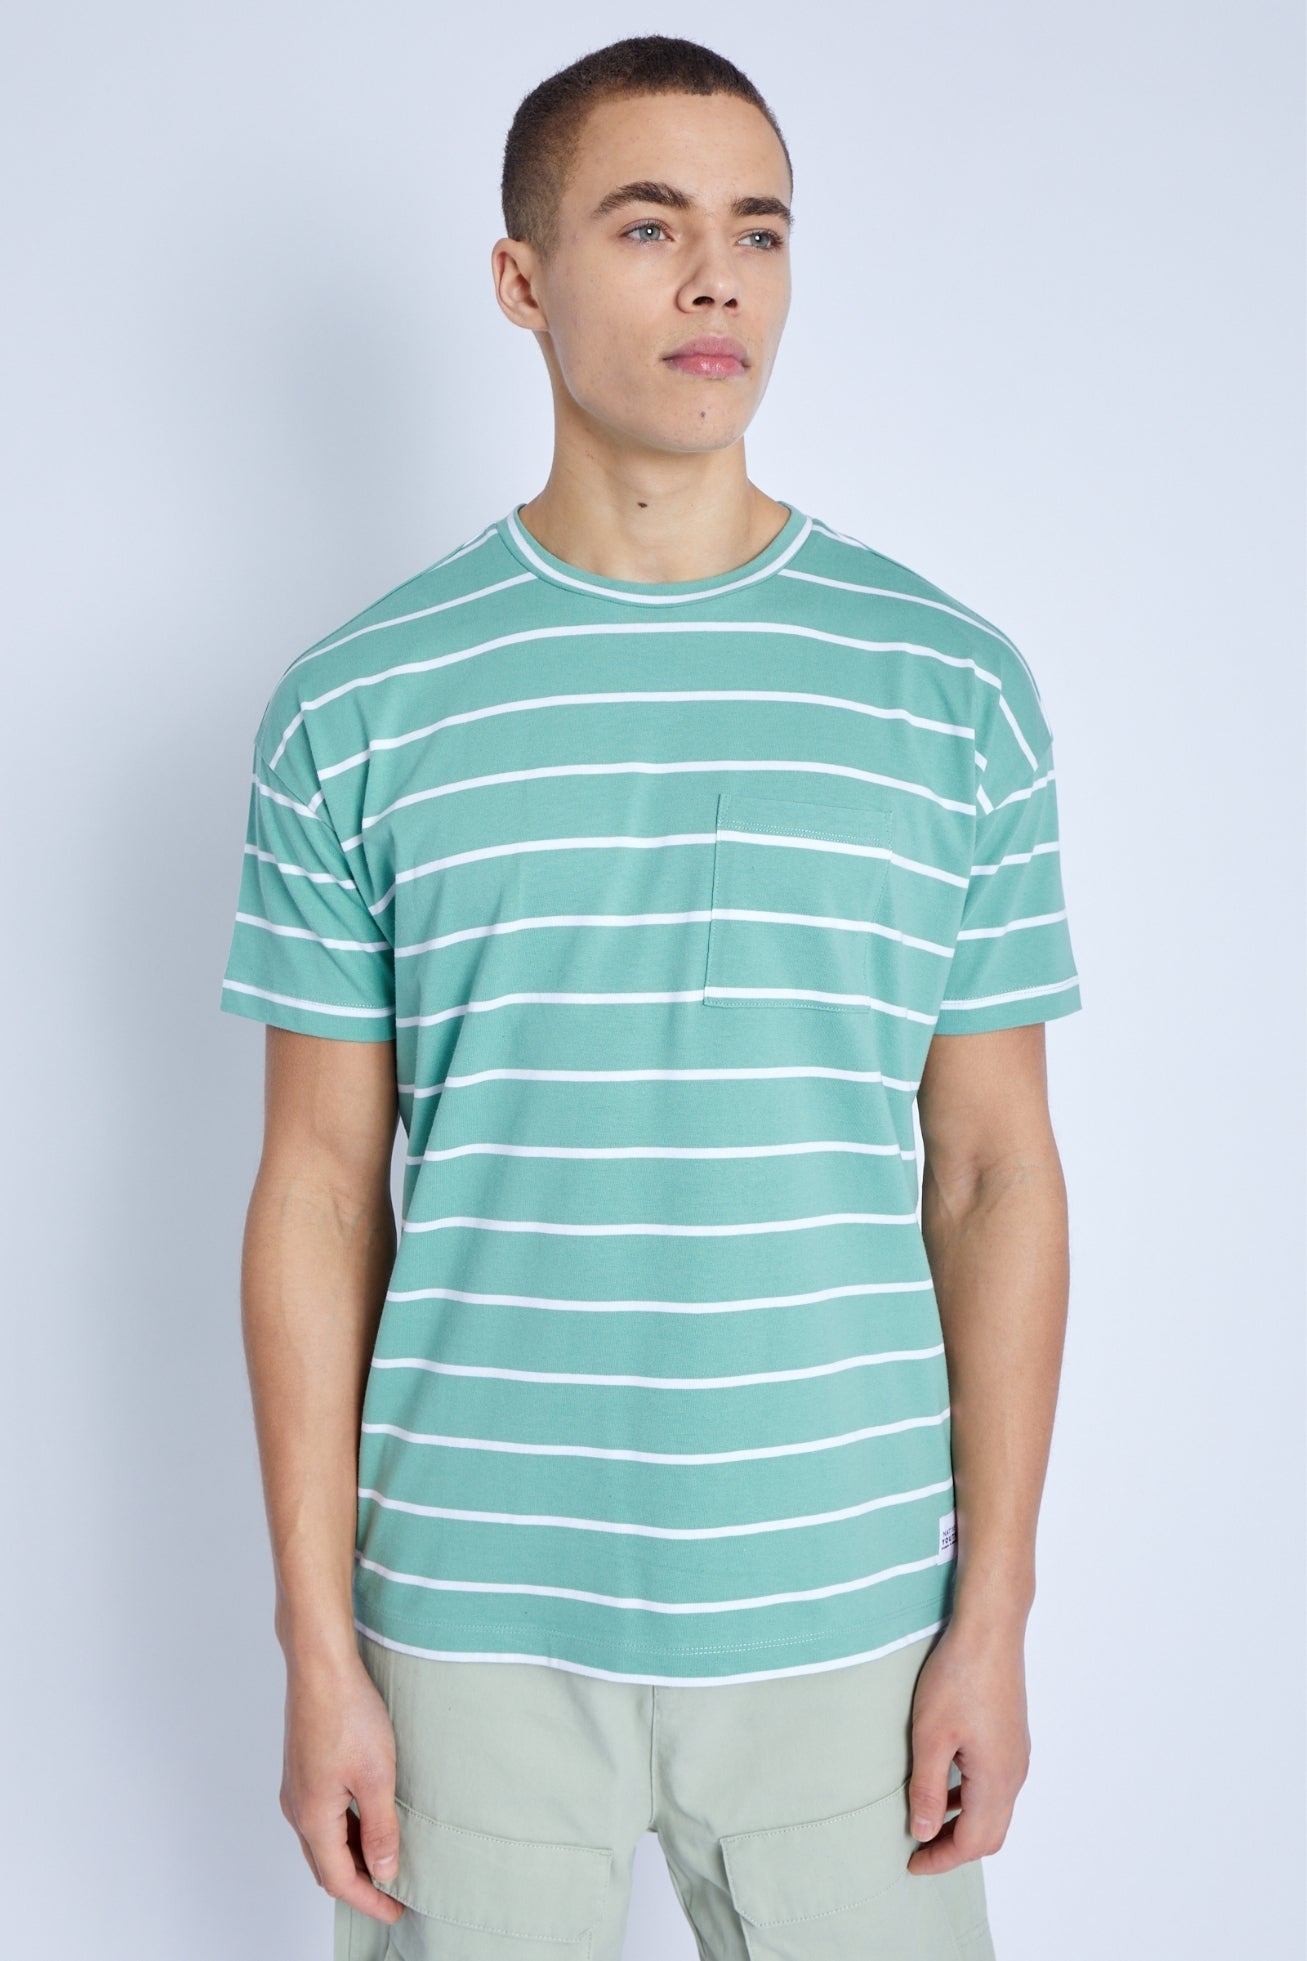 NEW IN: Men's Tops & T-Shirts | Native Youth – Page 2